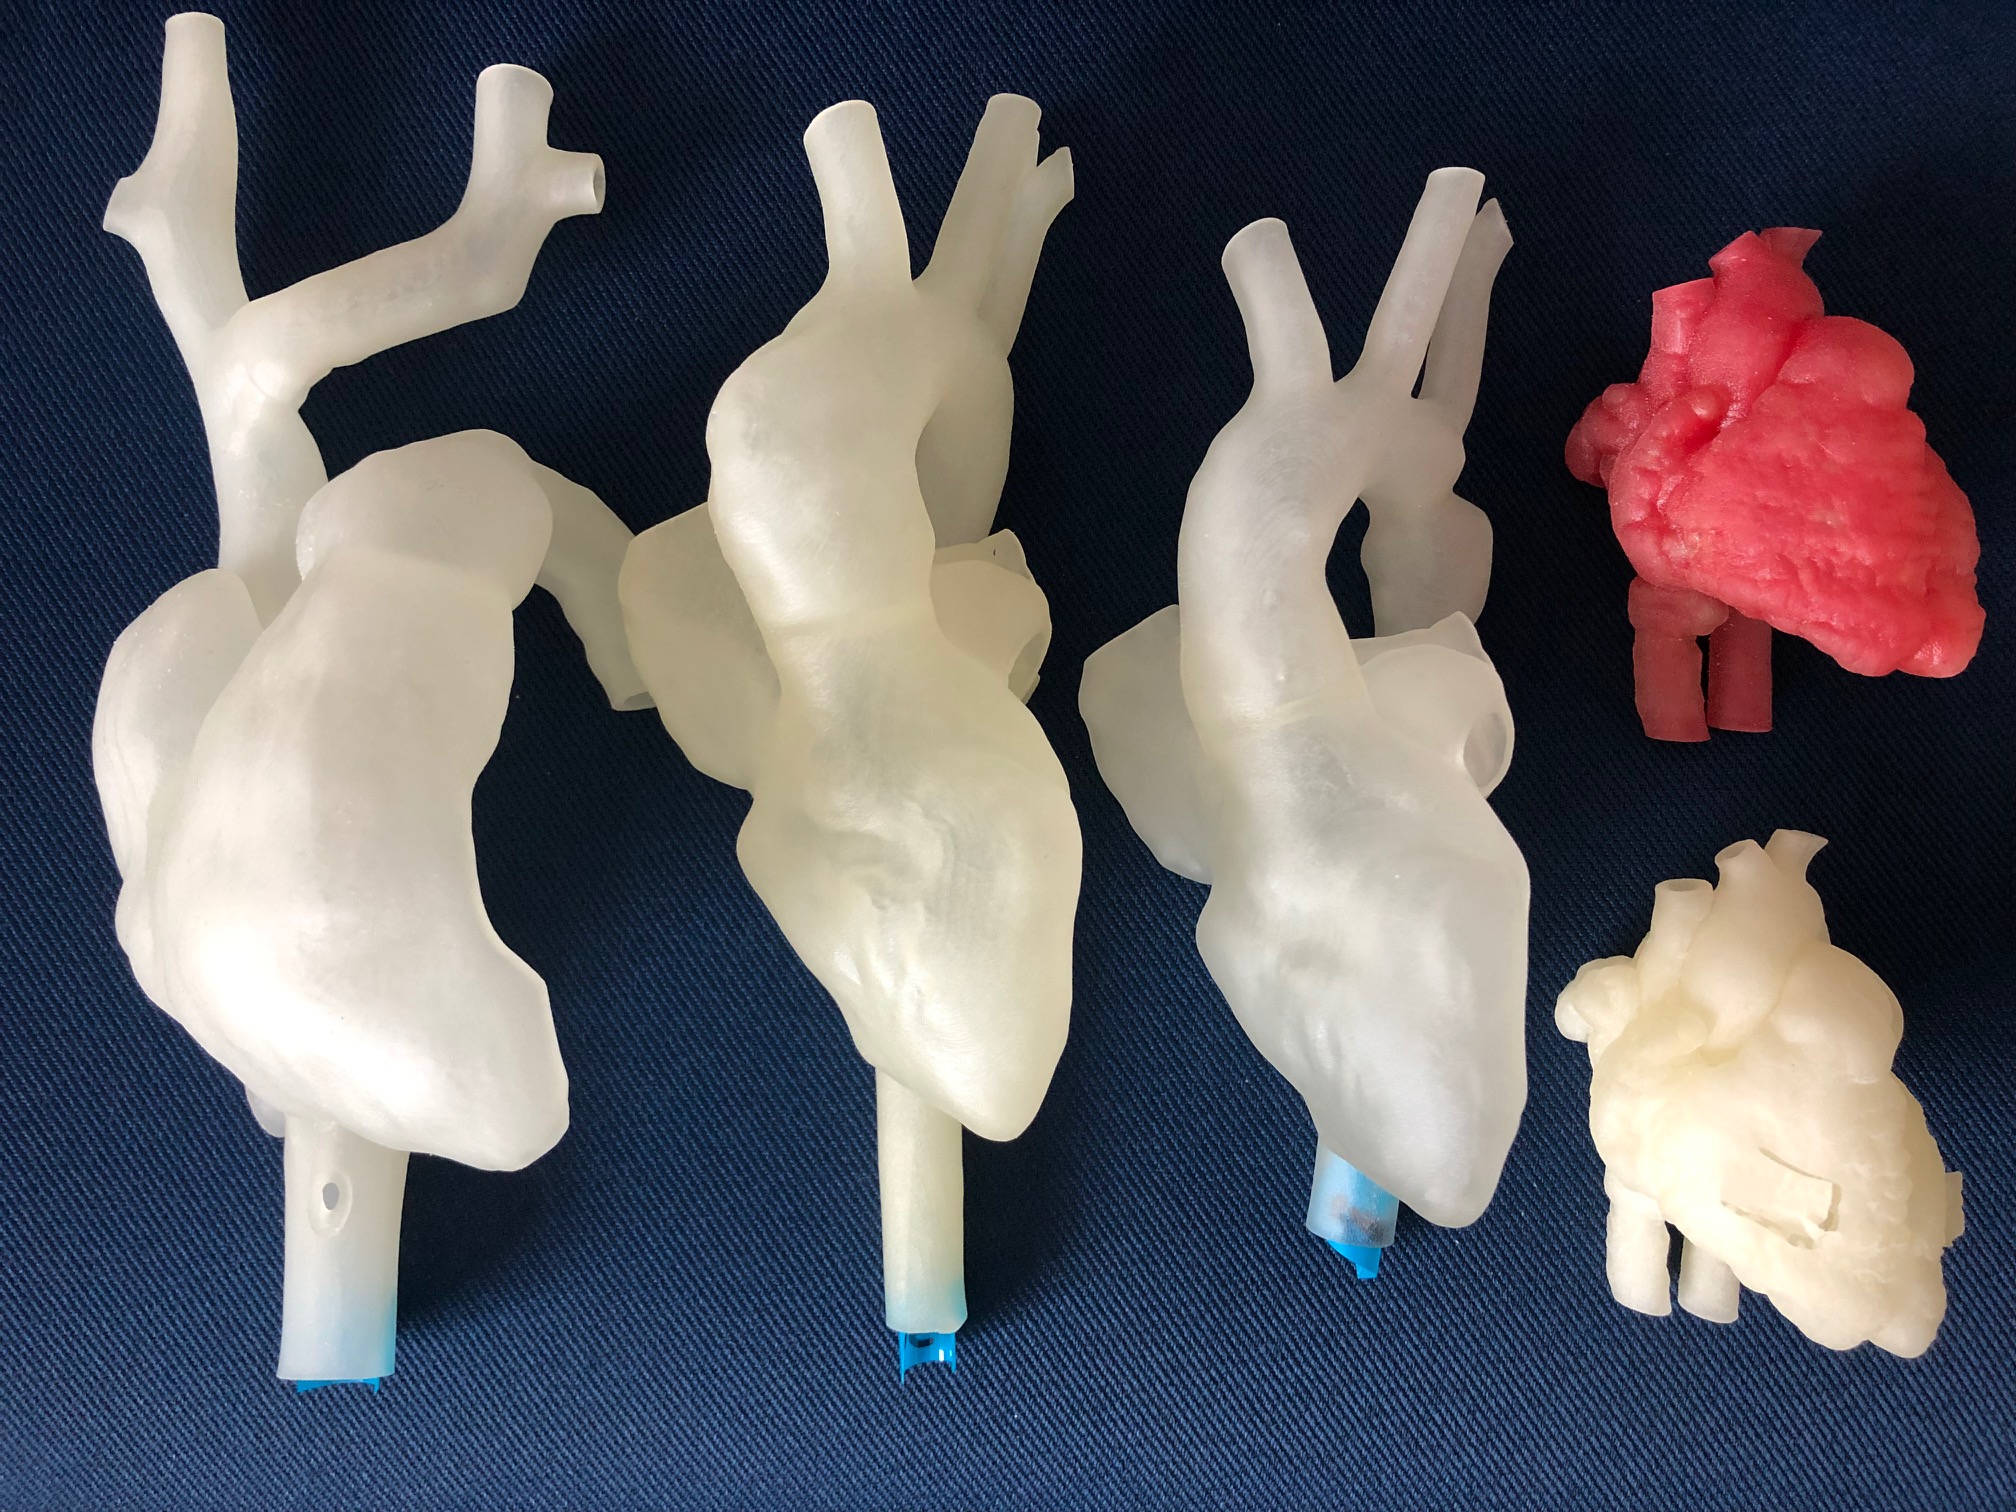 3D-printed heart models in different sizes